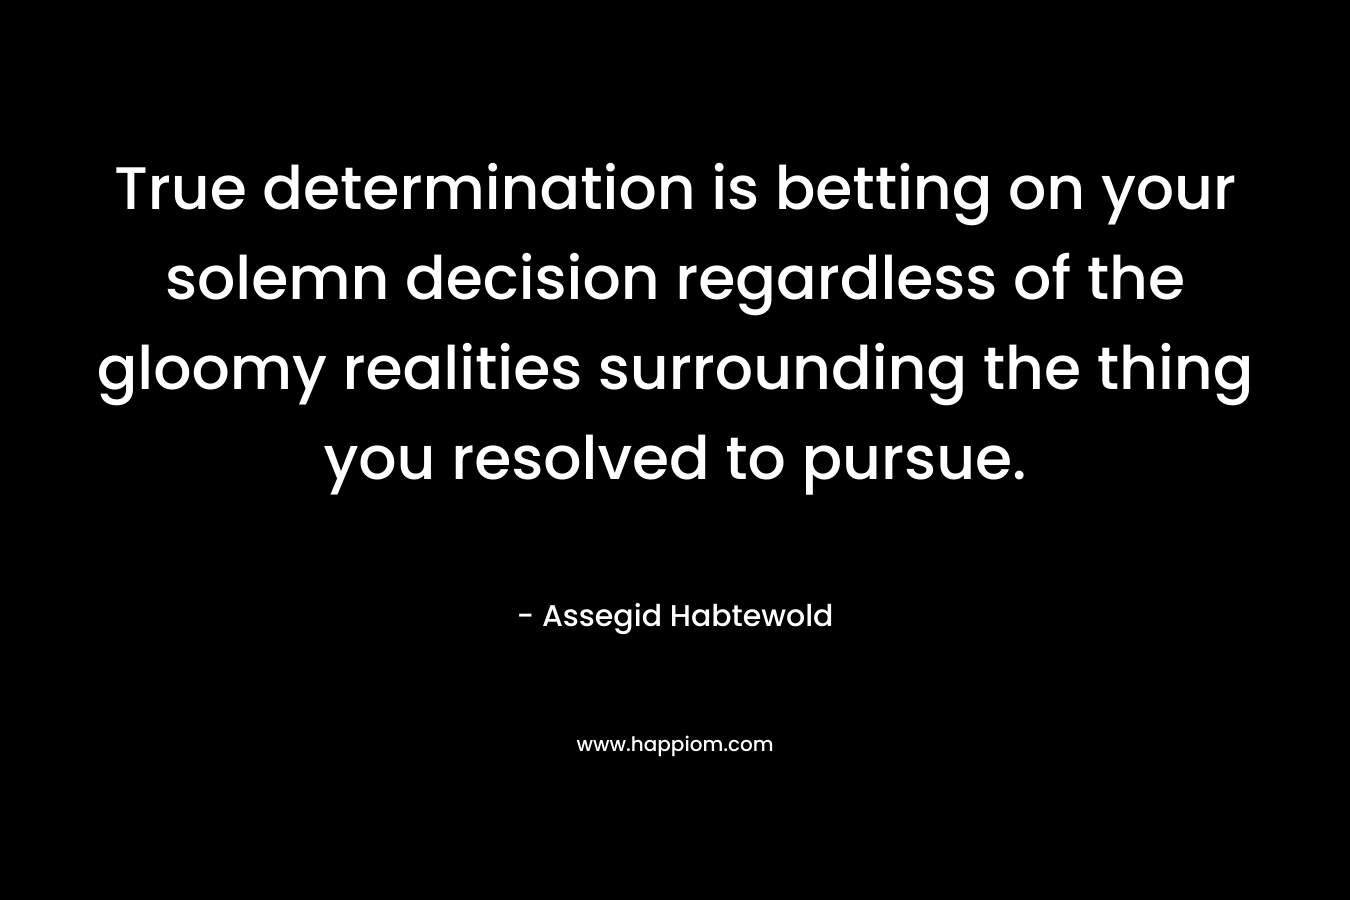 True determination is betting on your solemn decision regardless of the gloomy realities surrounding the thing you resolved to pursue.